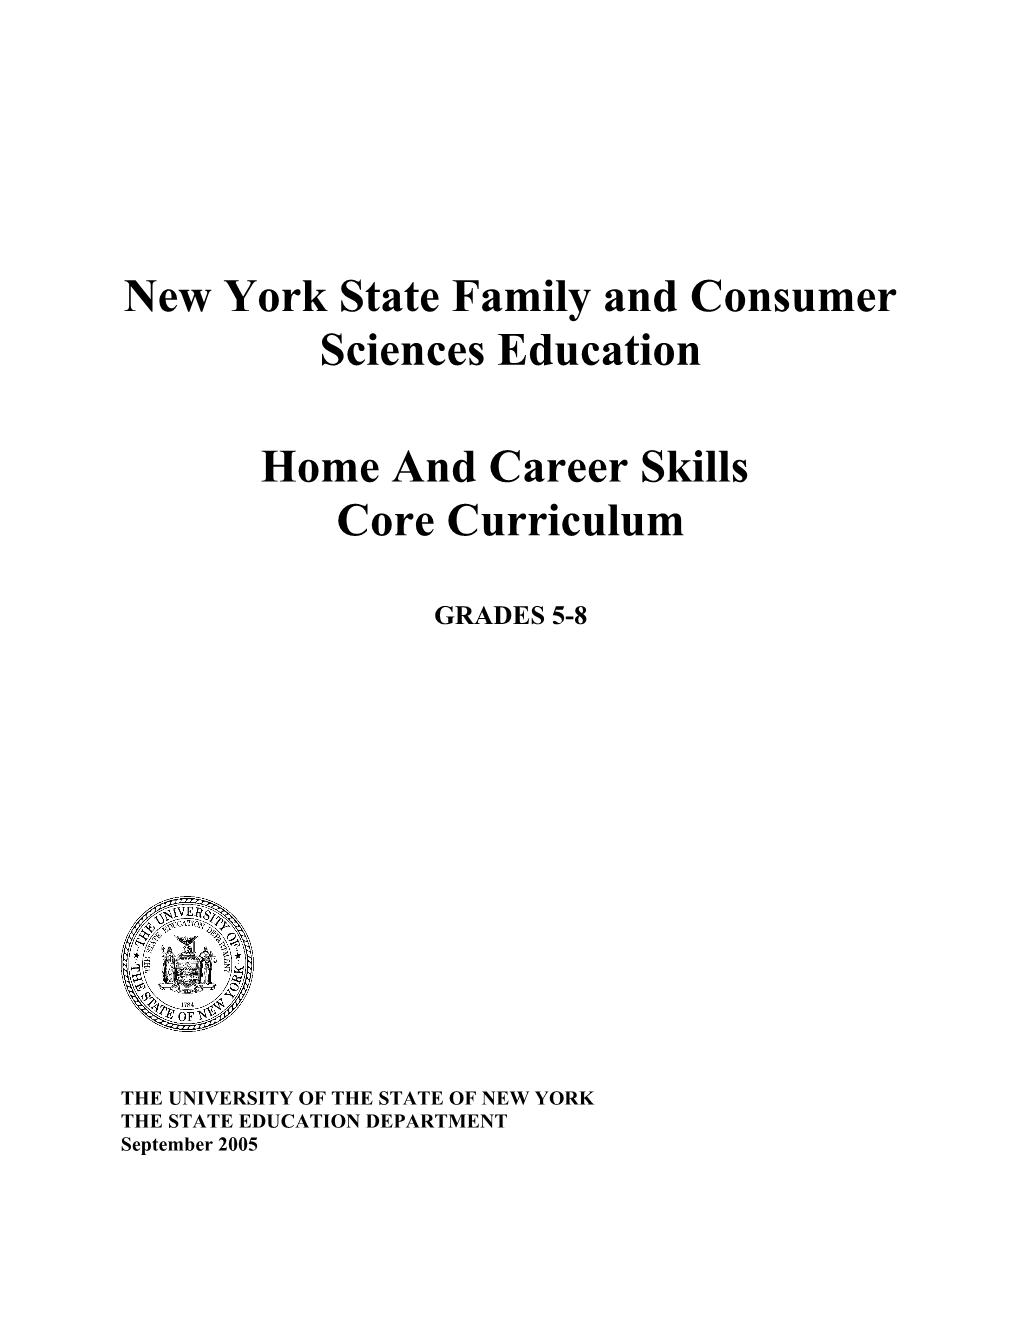 New York State Family and Consumer Sciences Education